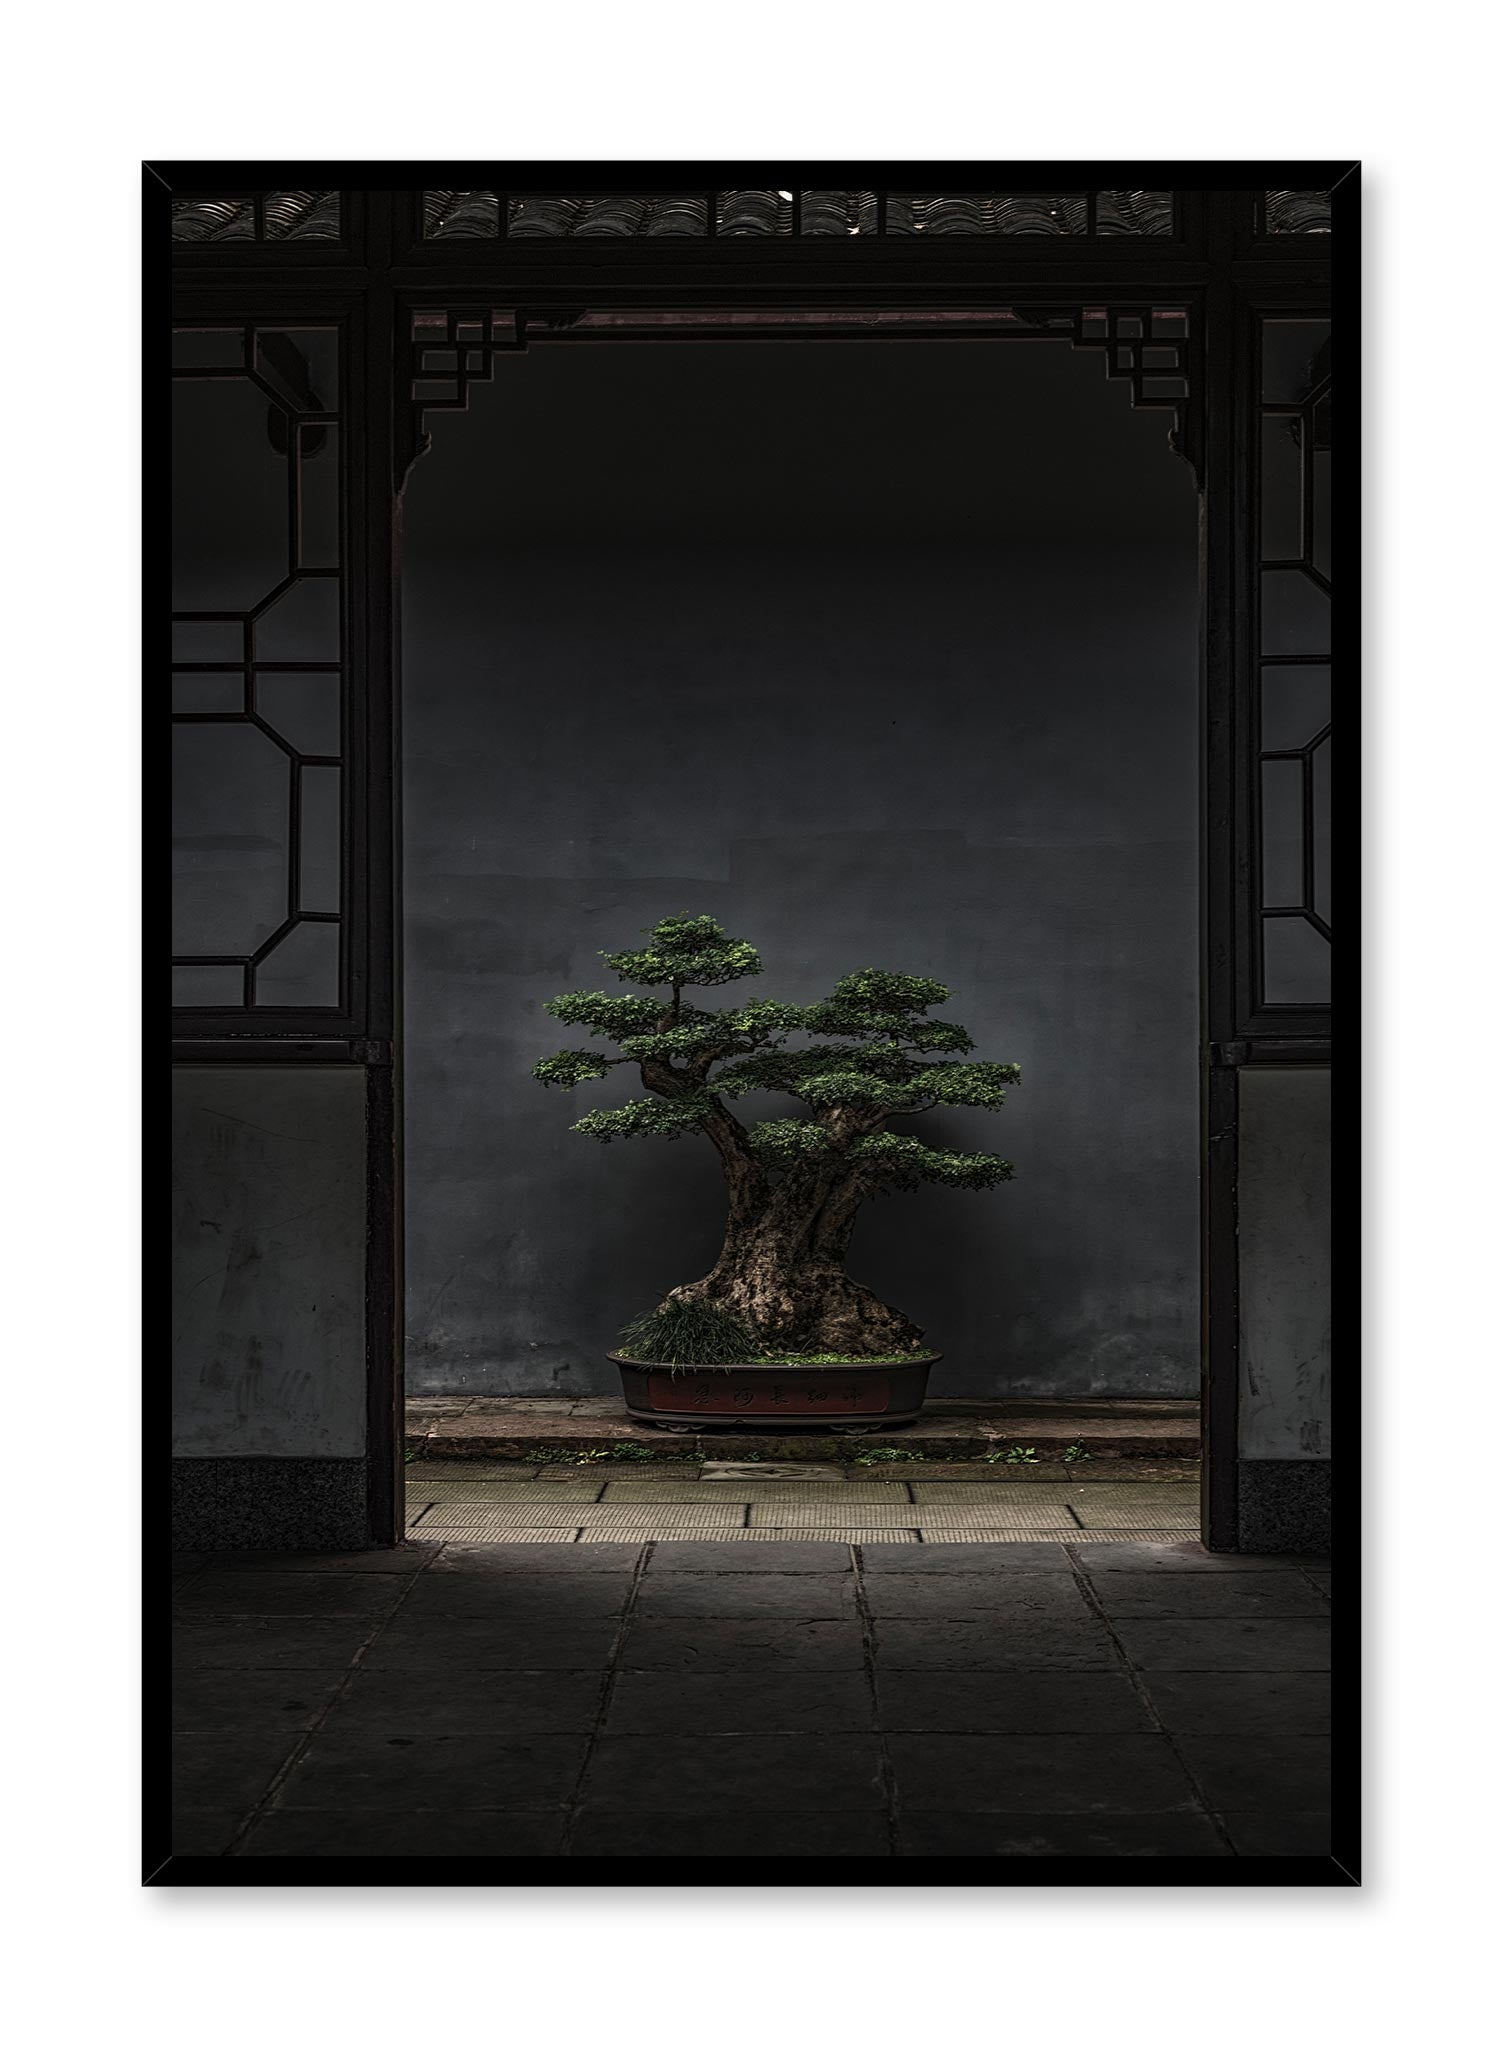 Bonsai Illumination is a minimalist photography by Opposite Wall of a medium size bonsai tree outside a traditional Japanese house.